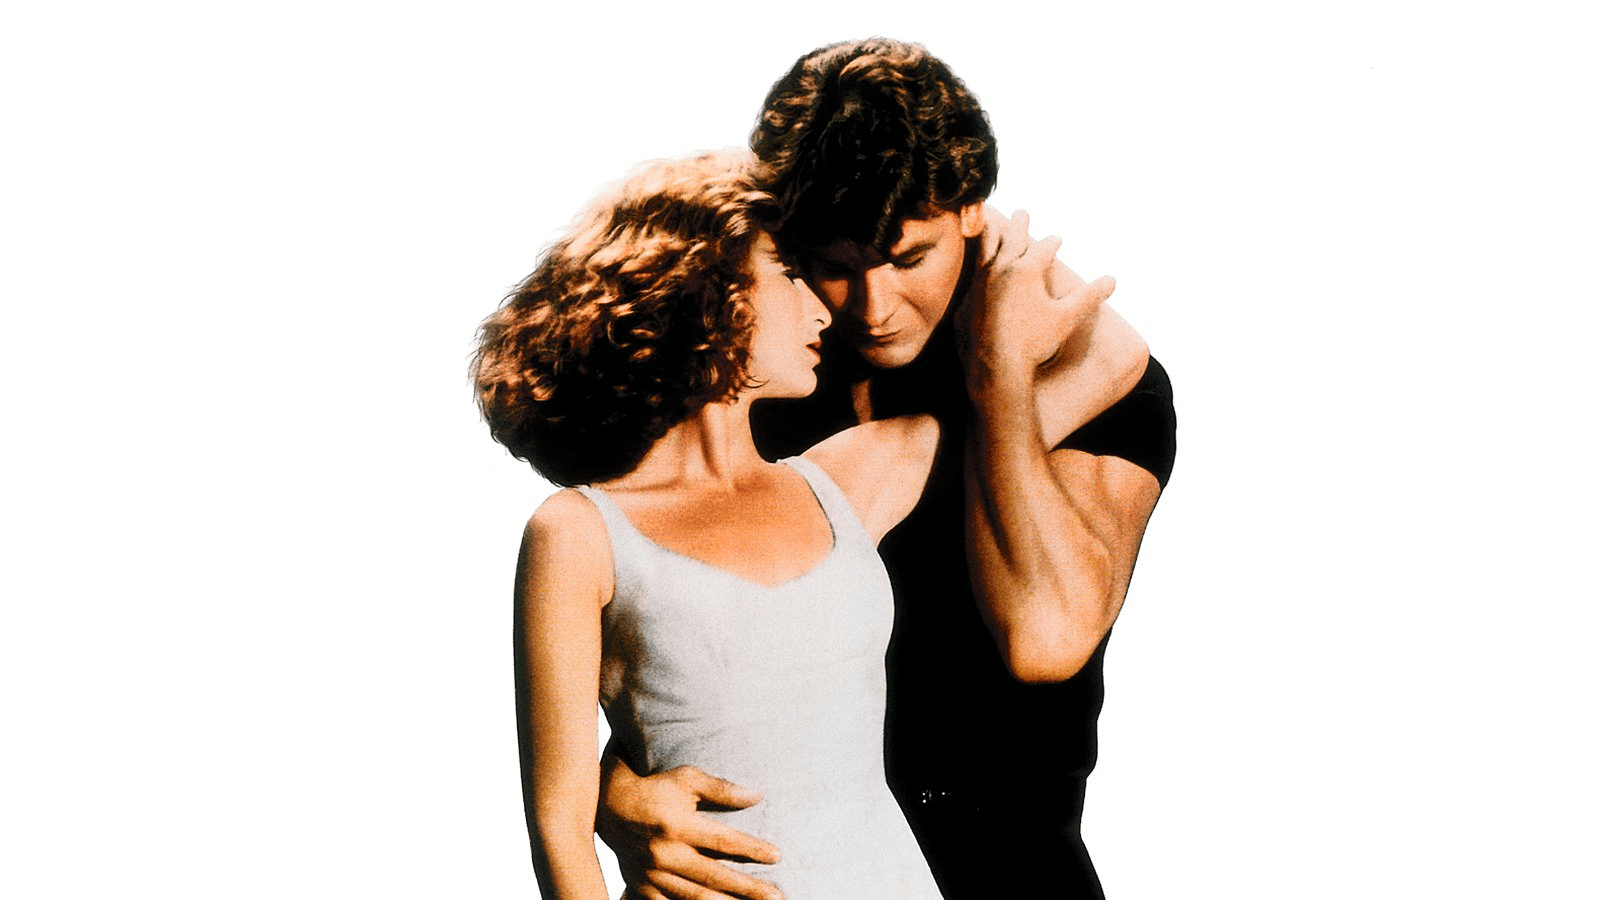 Jennifer Grey Dishes on Working With Patrick Swayze in Dirty Dancing